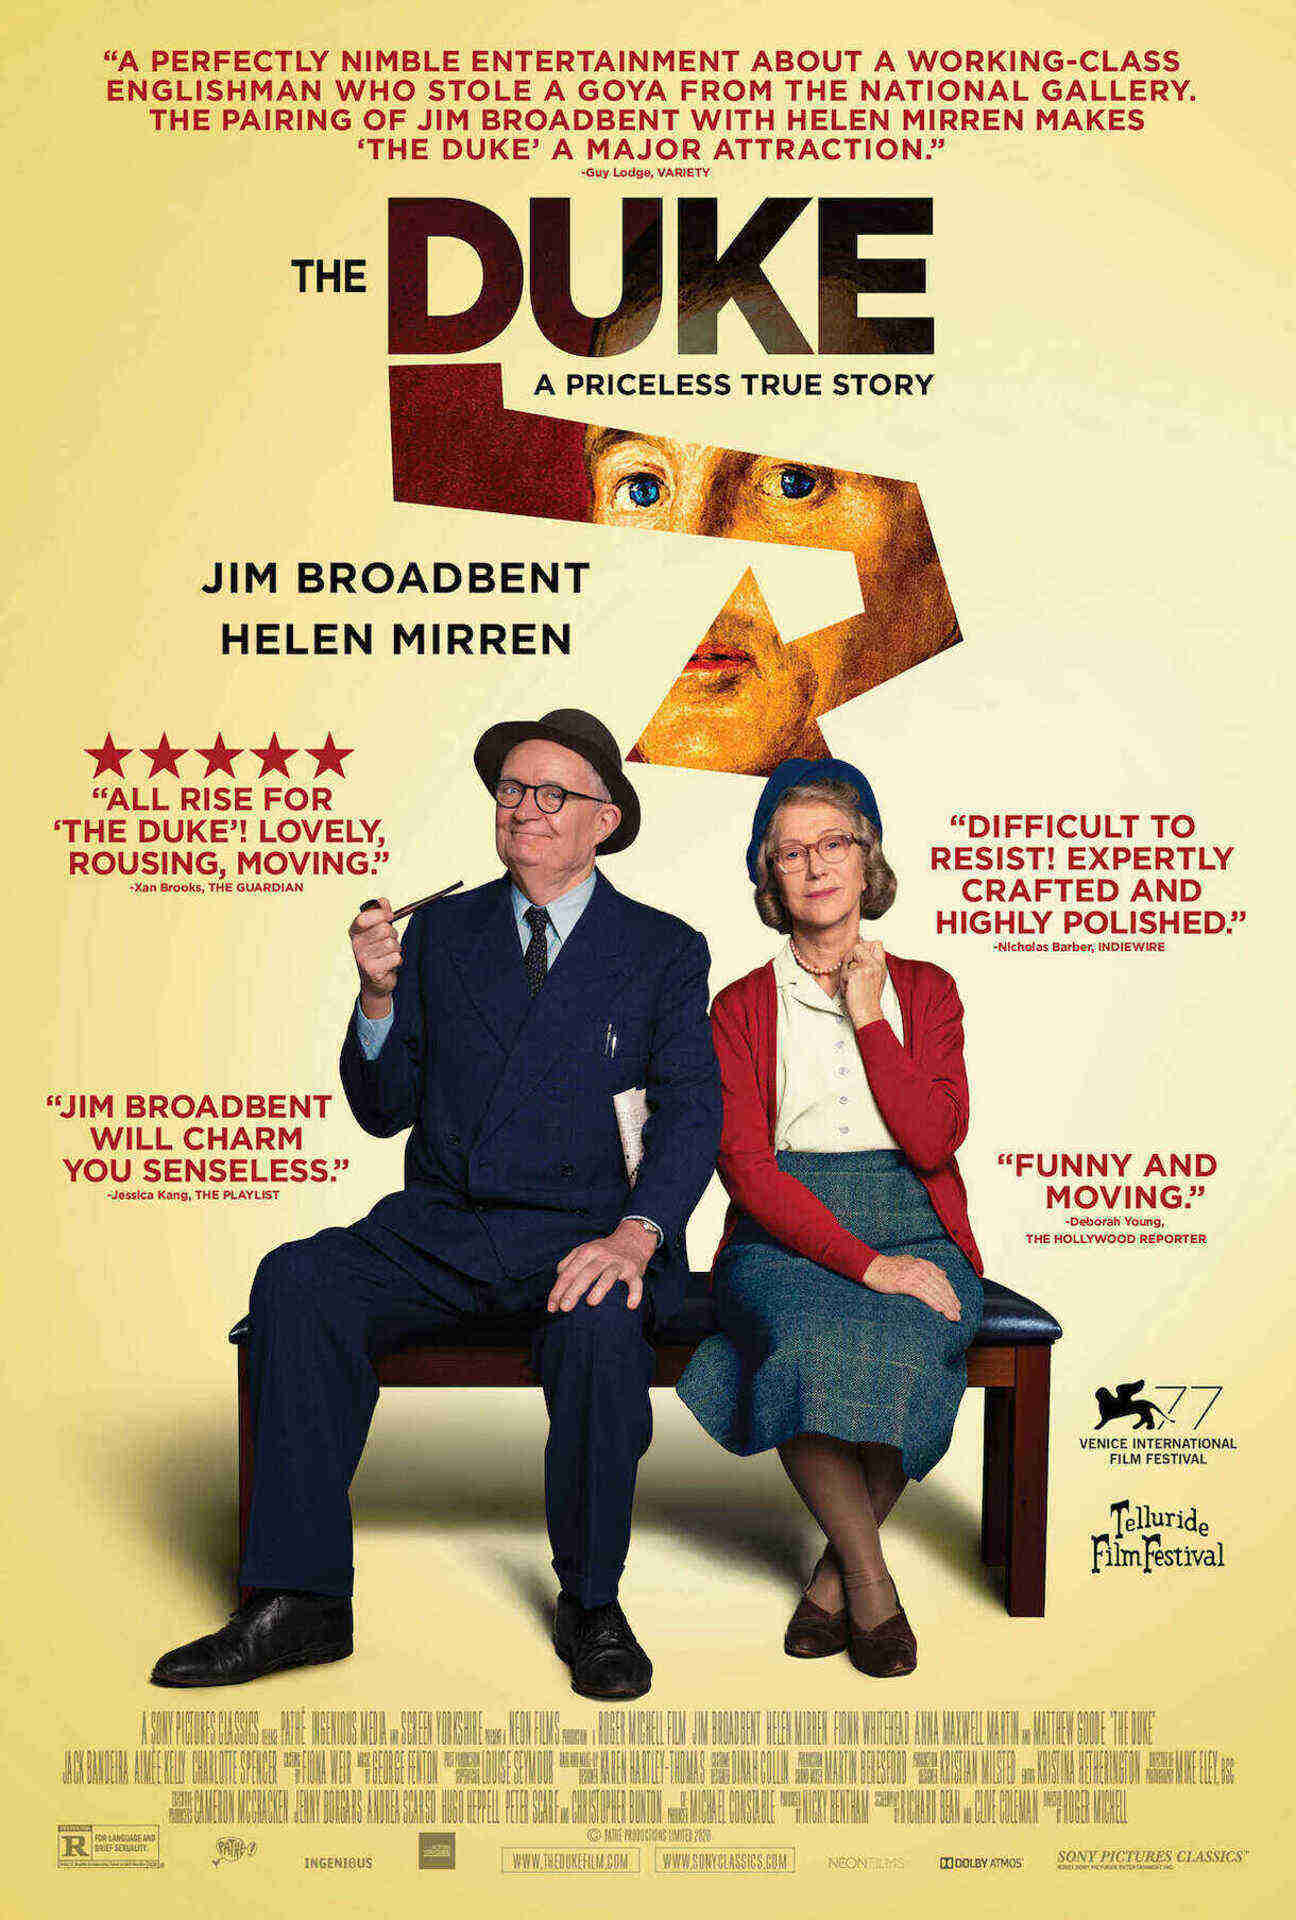 Theatrical poster for The Duke. Courtesy of Sony Pictures Classics.